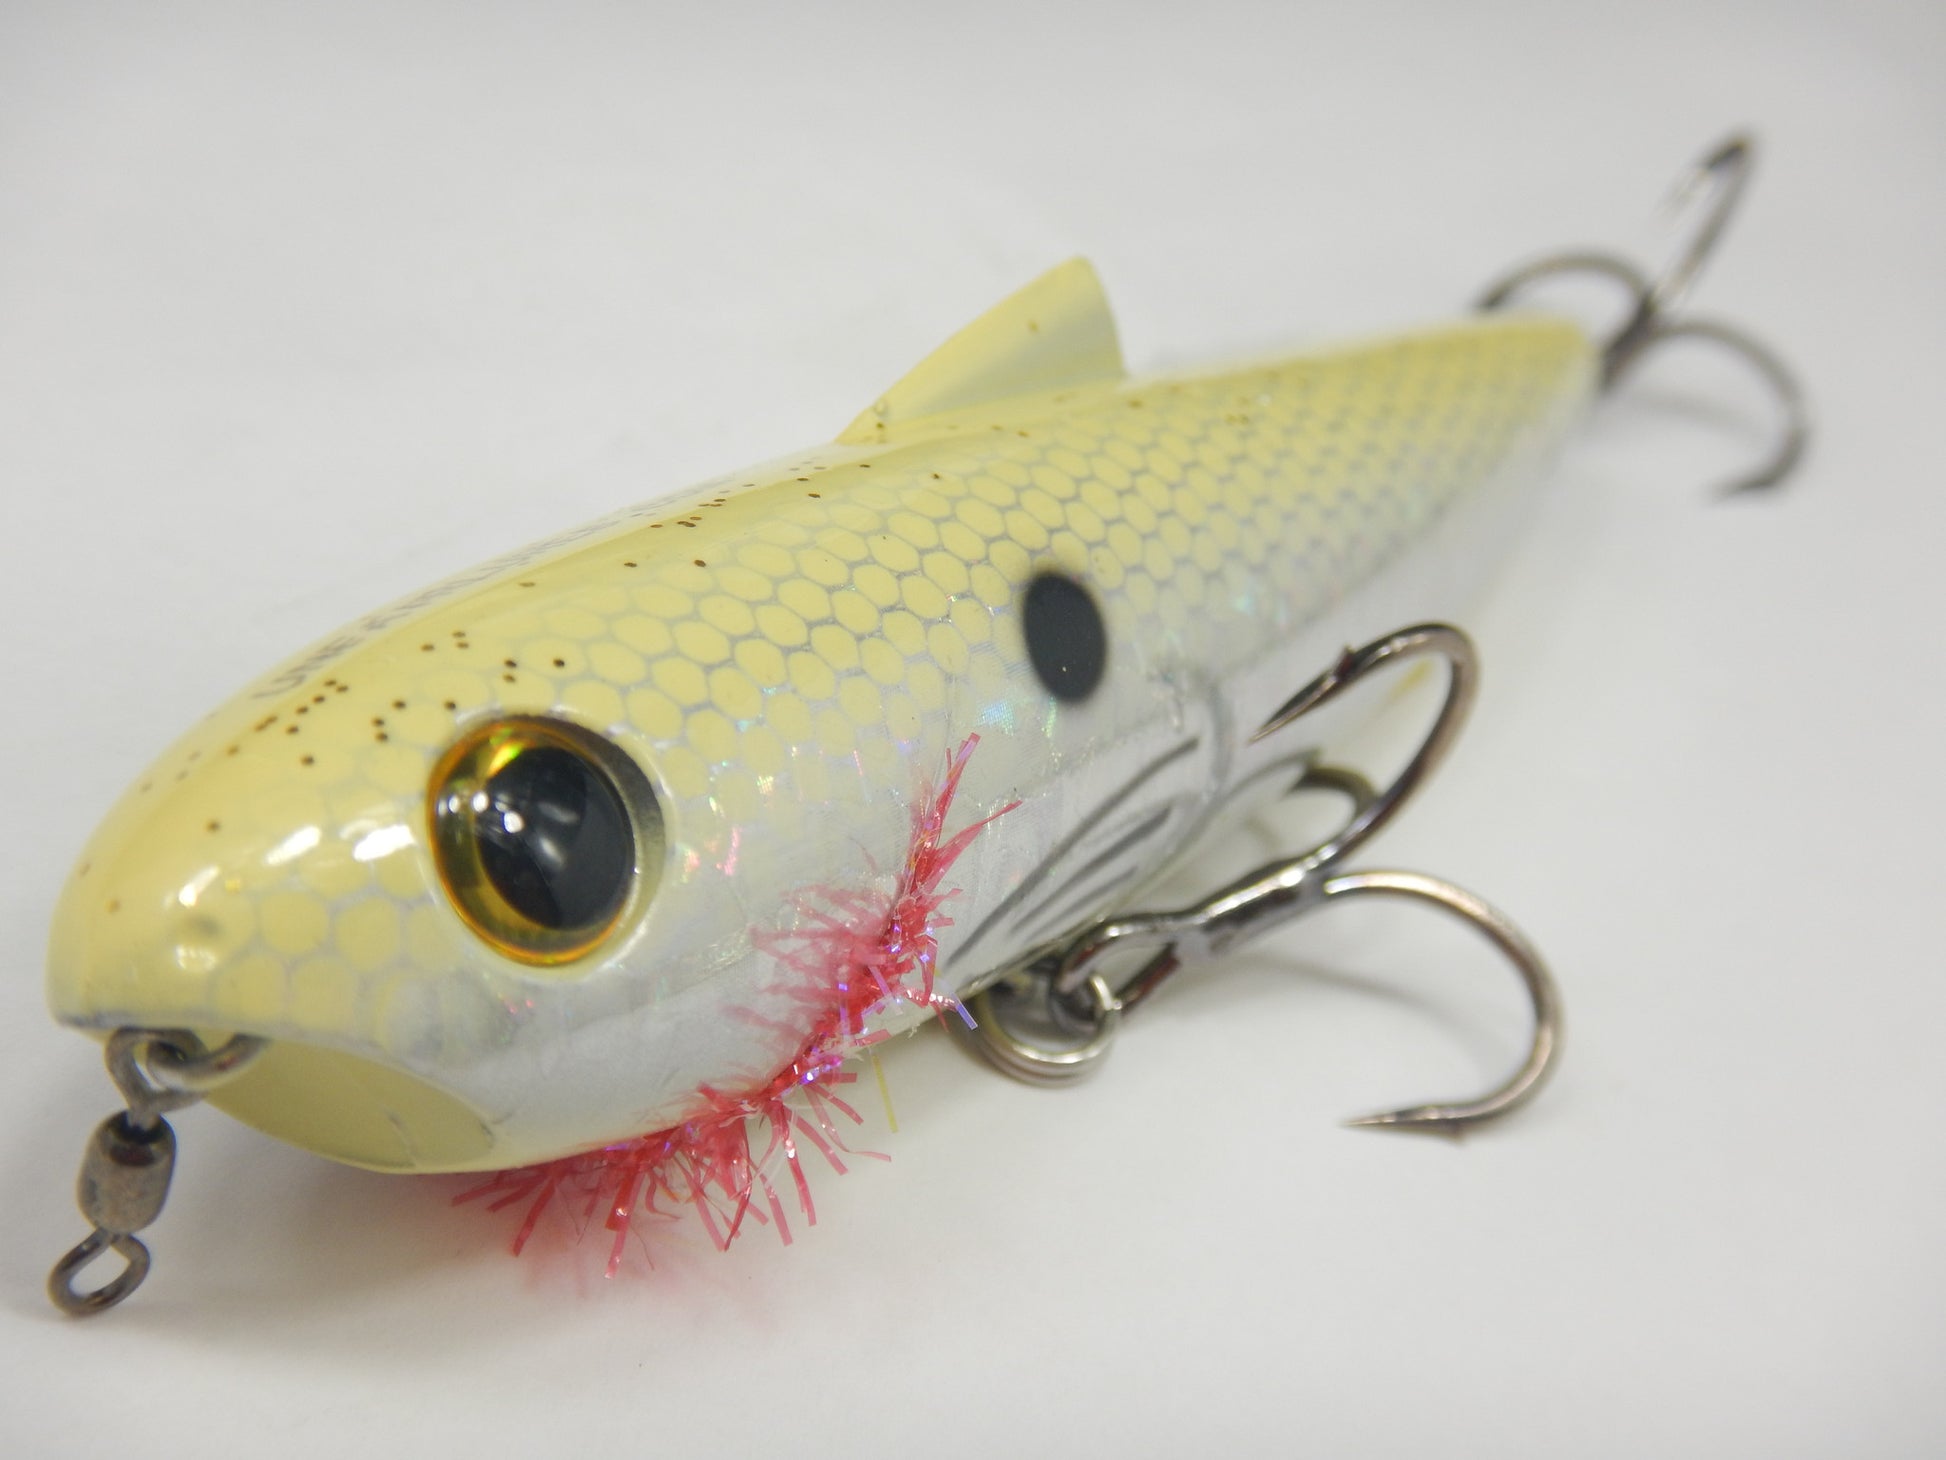 Hooked On Bait and Tackle - Rapala Giant Lure in limited edition Spotted  Dog have just arrived into the store. Only 350 produced for Australia. We  were lucky enough to secure 10.